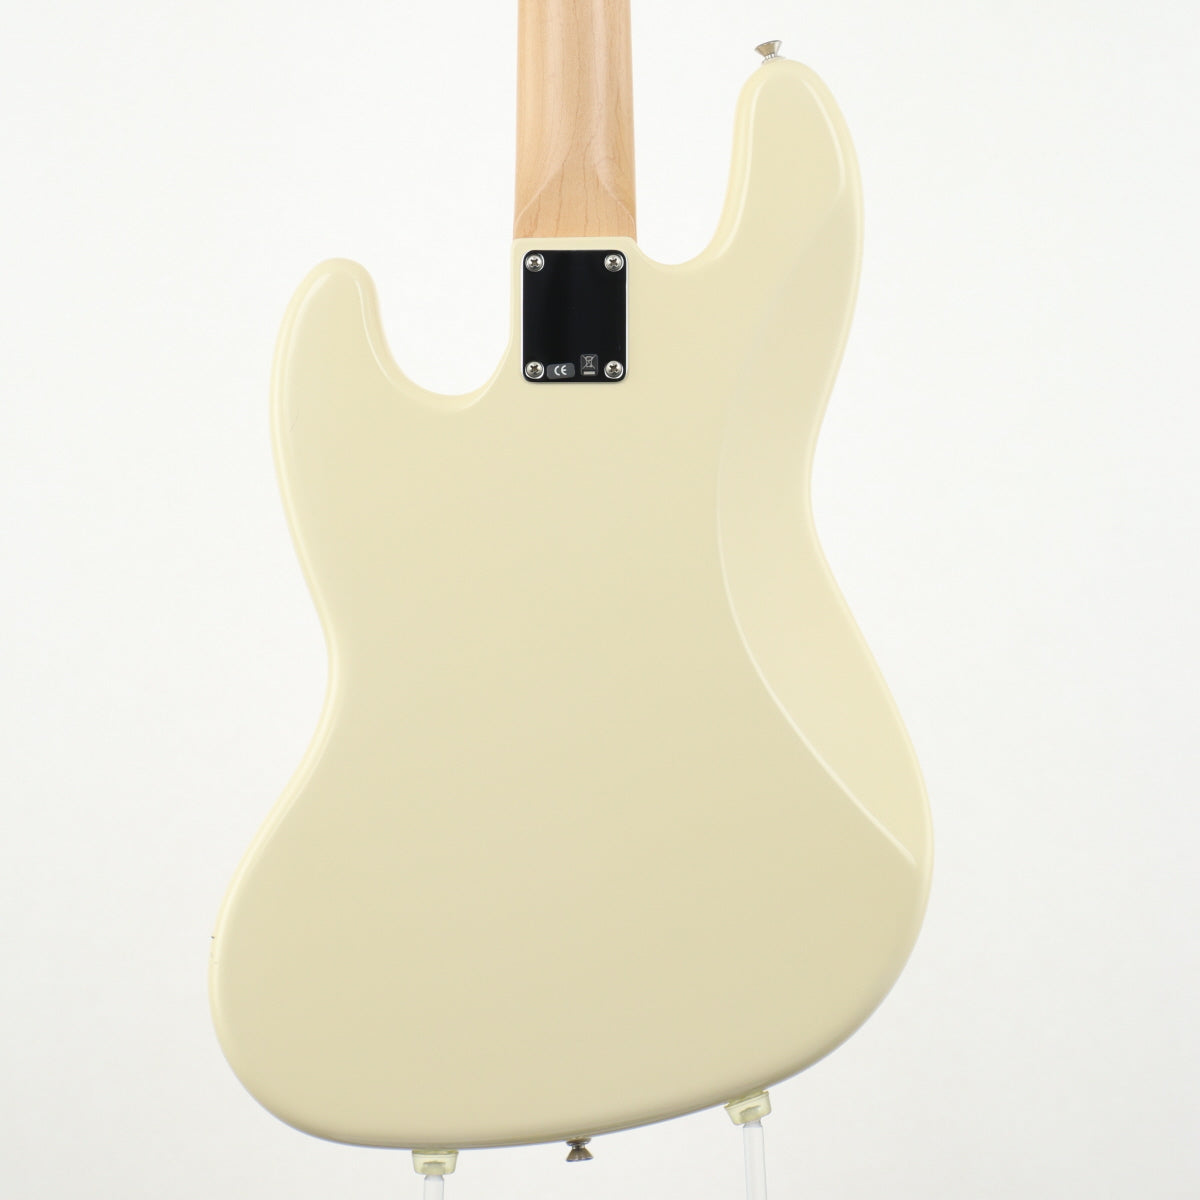 [SN US10128191] USED Fender USA / American Special Jazz Bass MOD Olympic White [11]